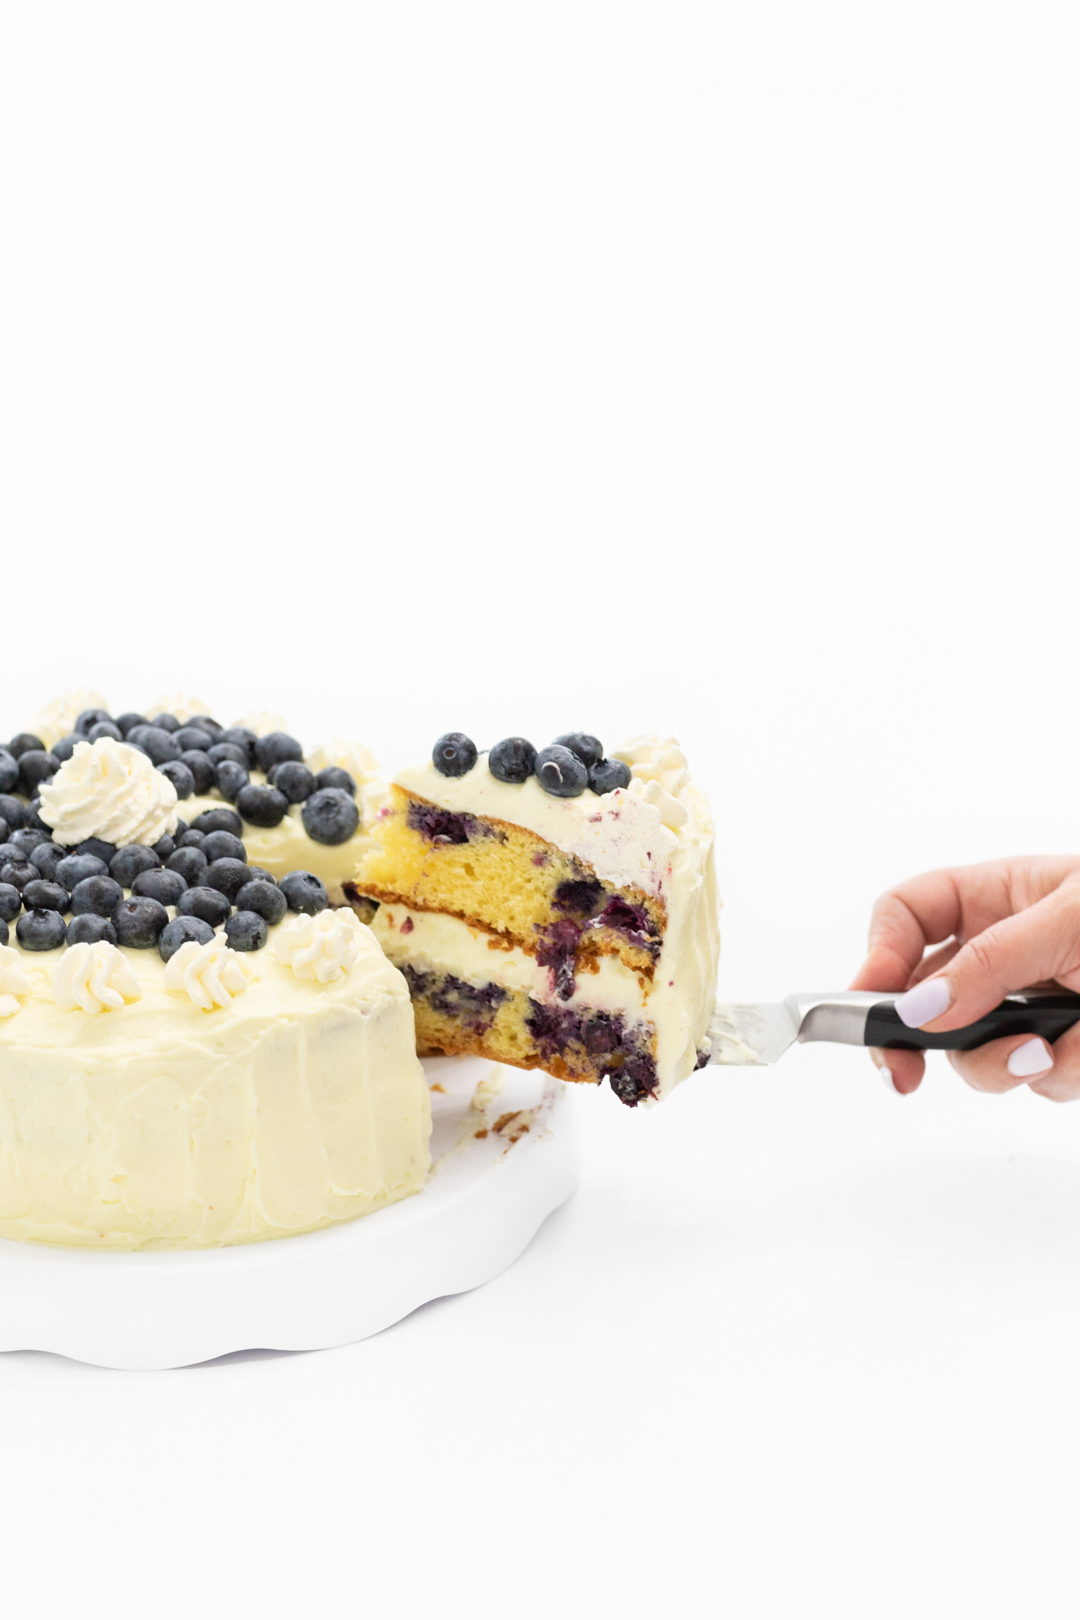 Cutting a slice of cake to serve.